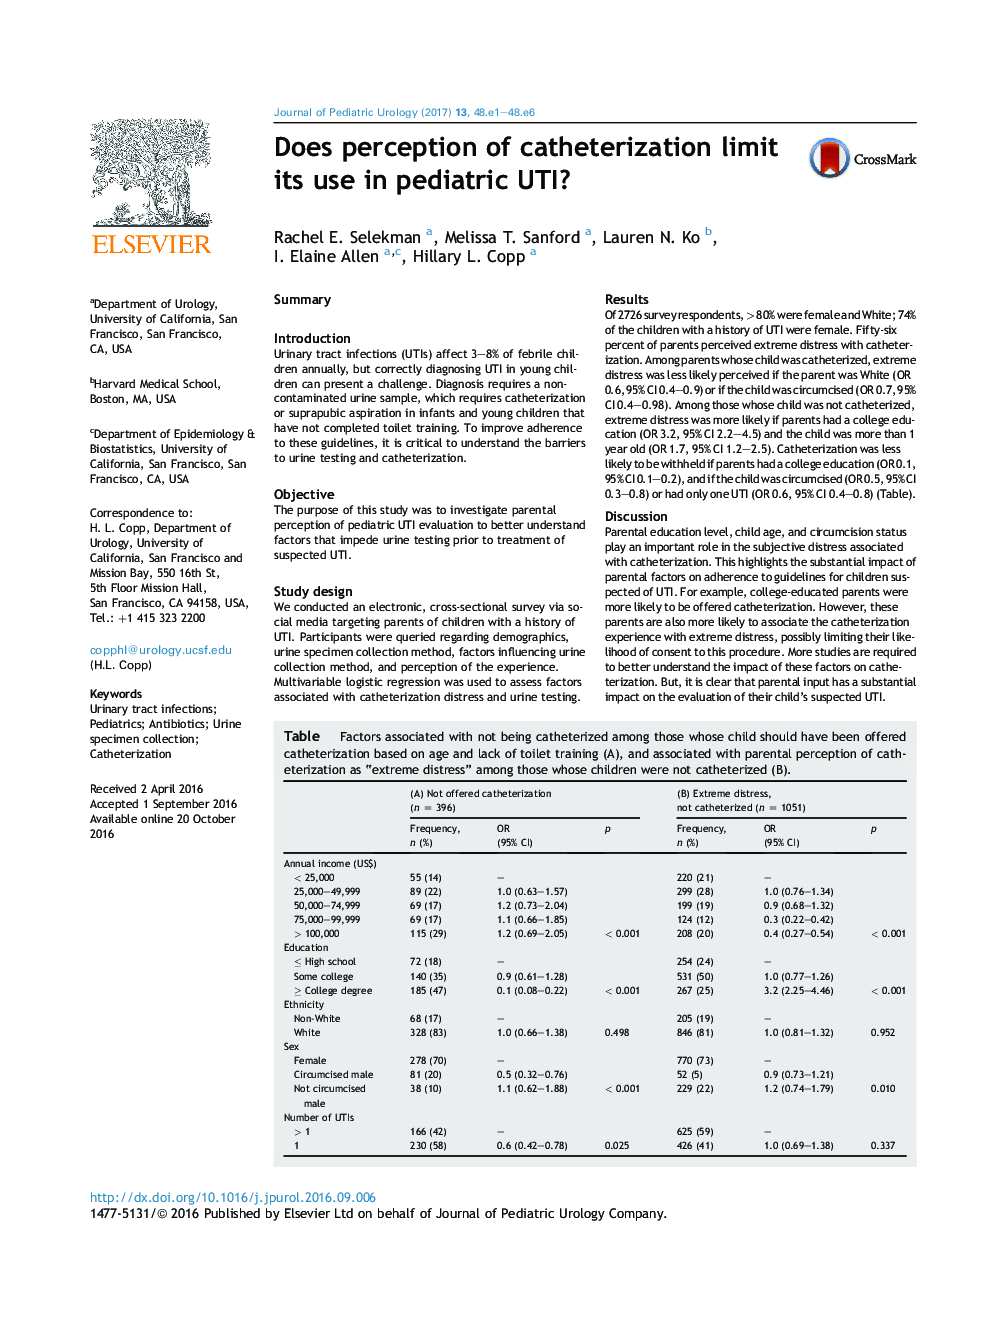 Does perception of catheterization limit its use in pediatric UTI?